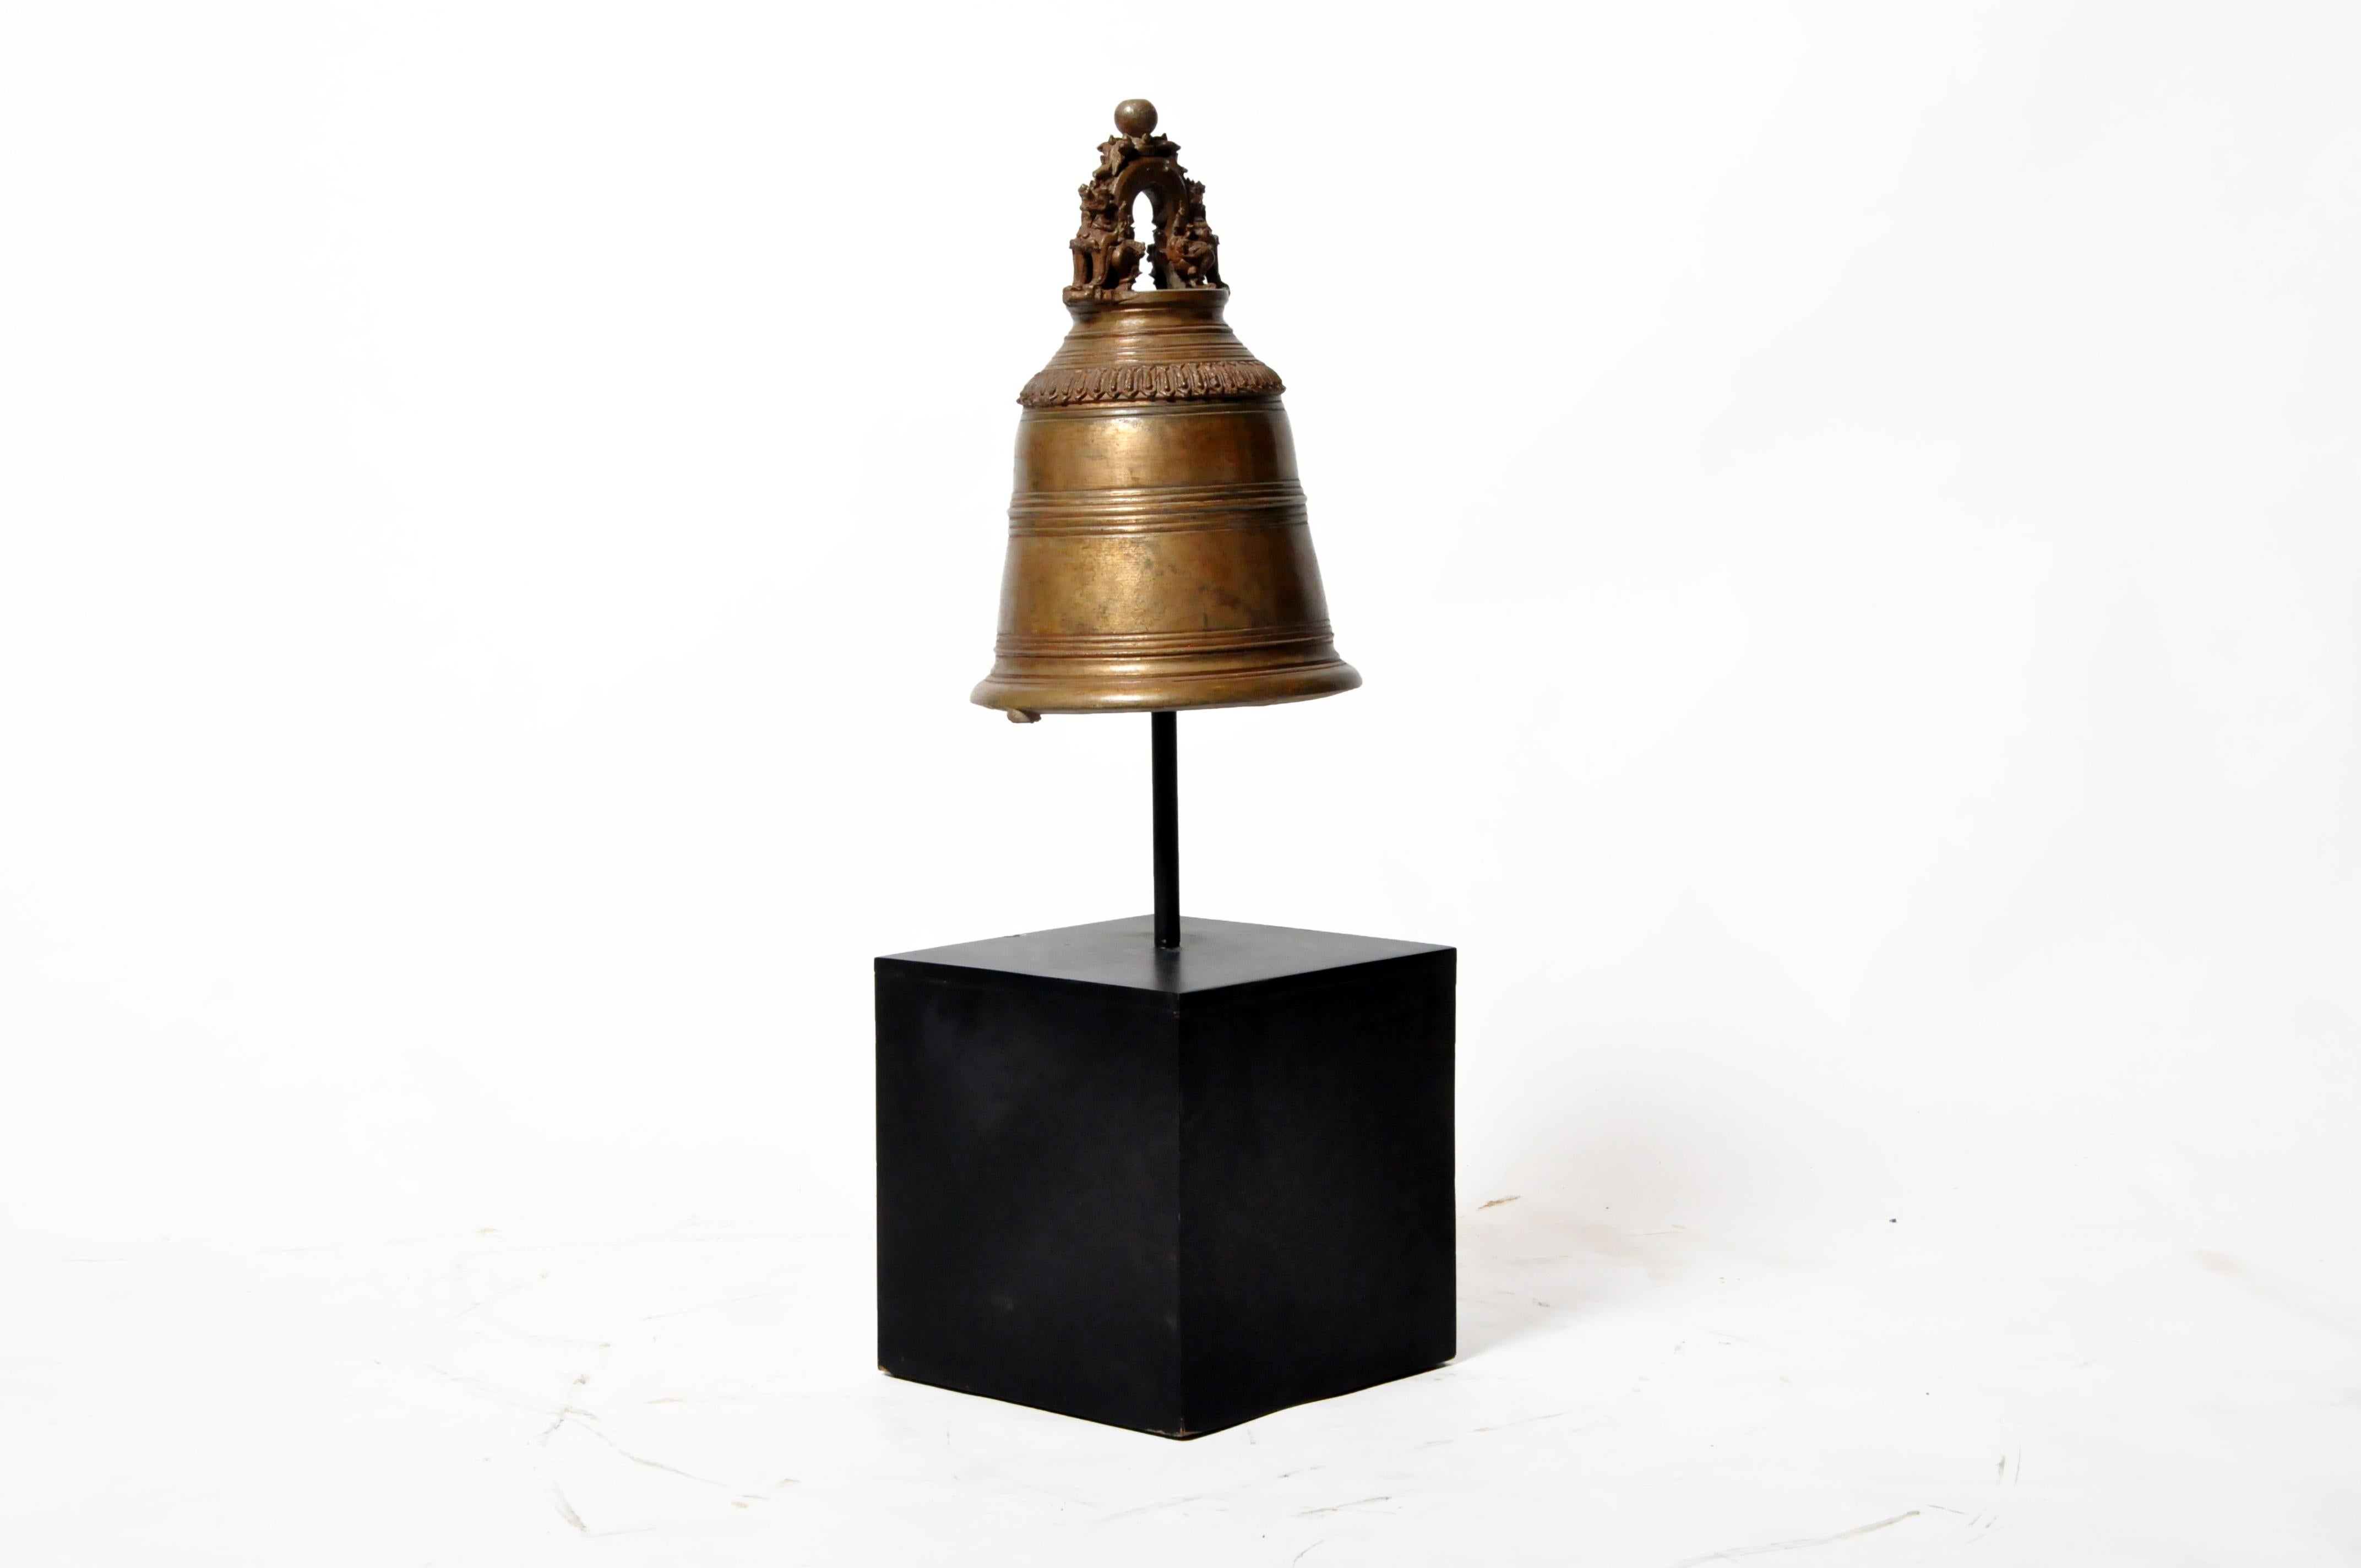 This brass bell was given to a temple as an act of merit-making. It was suspended from a heavy cord and rung on ceremonial occasions. The piece dates to the early 20th century and came from central Thailand. Wear consistent with age and use.
  